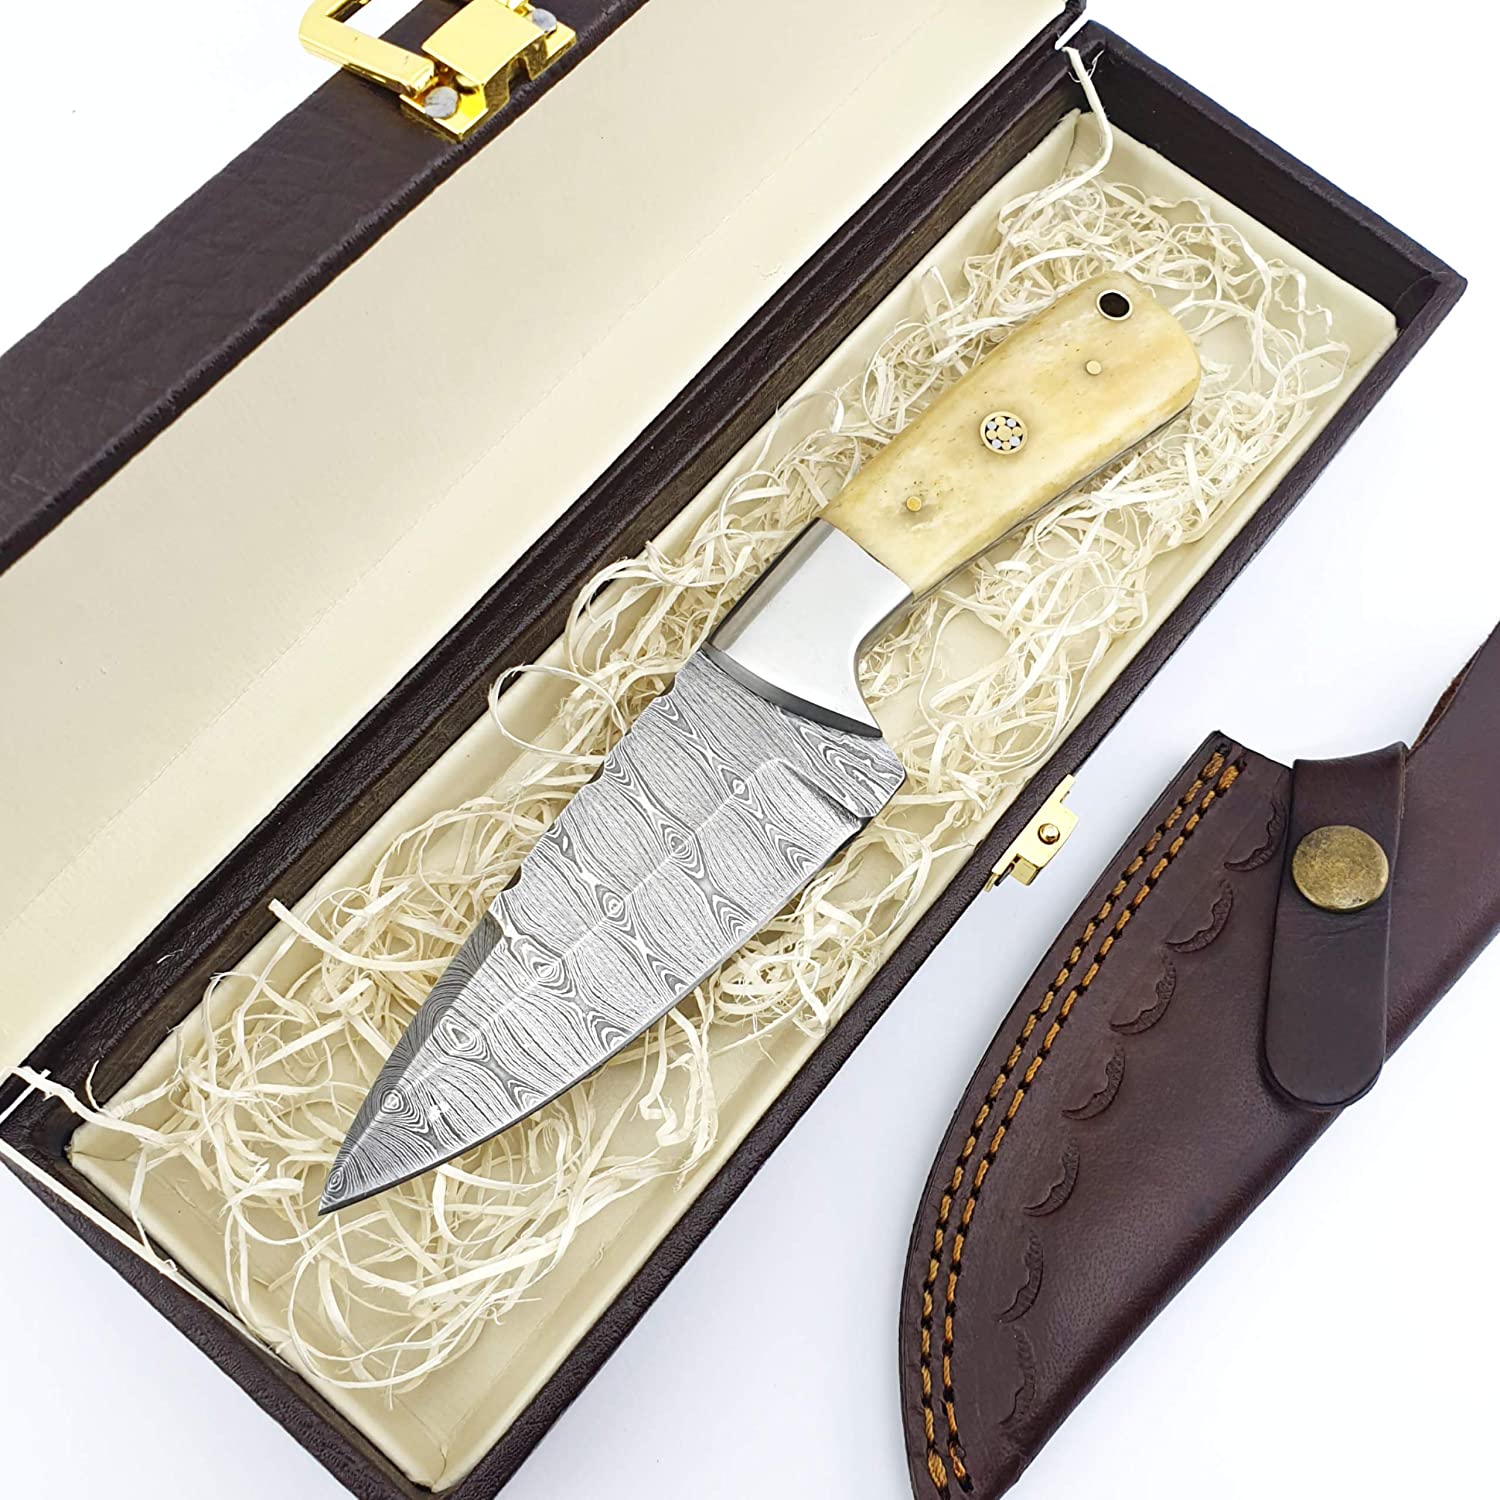 SS-1 Knife4U Damascus Hunting Knife with Sheath|8" Best Camping,Hiking,Tactical,Survival Knife for Men|EDC Bushcraft Accessories Tool|Sharp Blade with Natural Handle and Knife Display Box